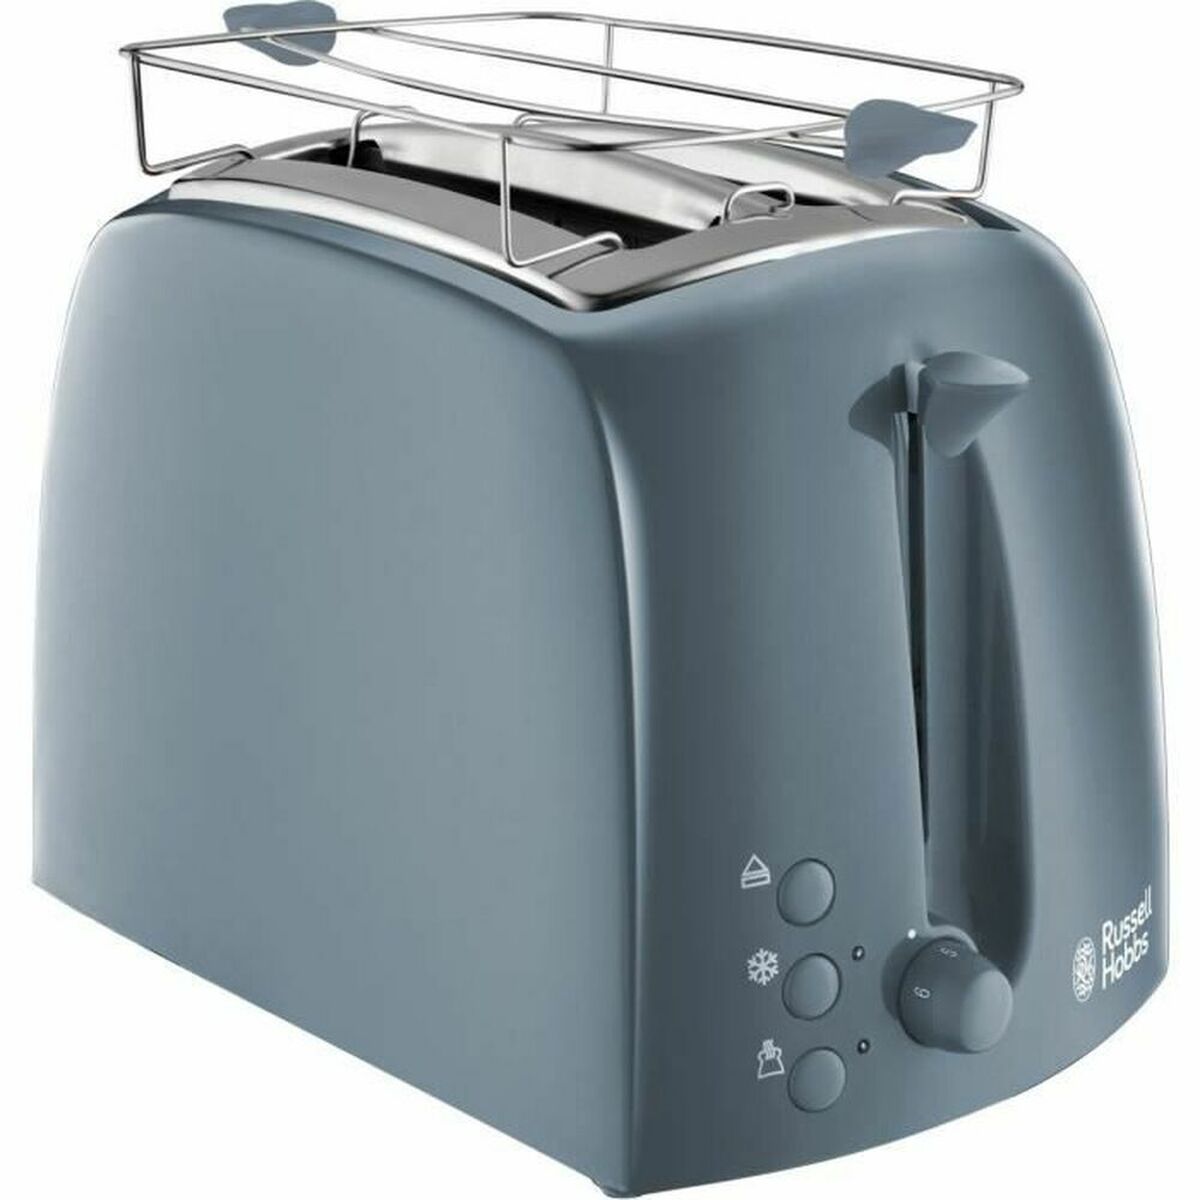 Grille-pain Russell Hobbs 21644-56 850 W Gris